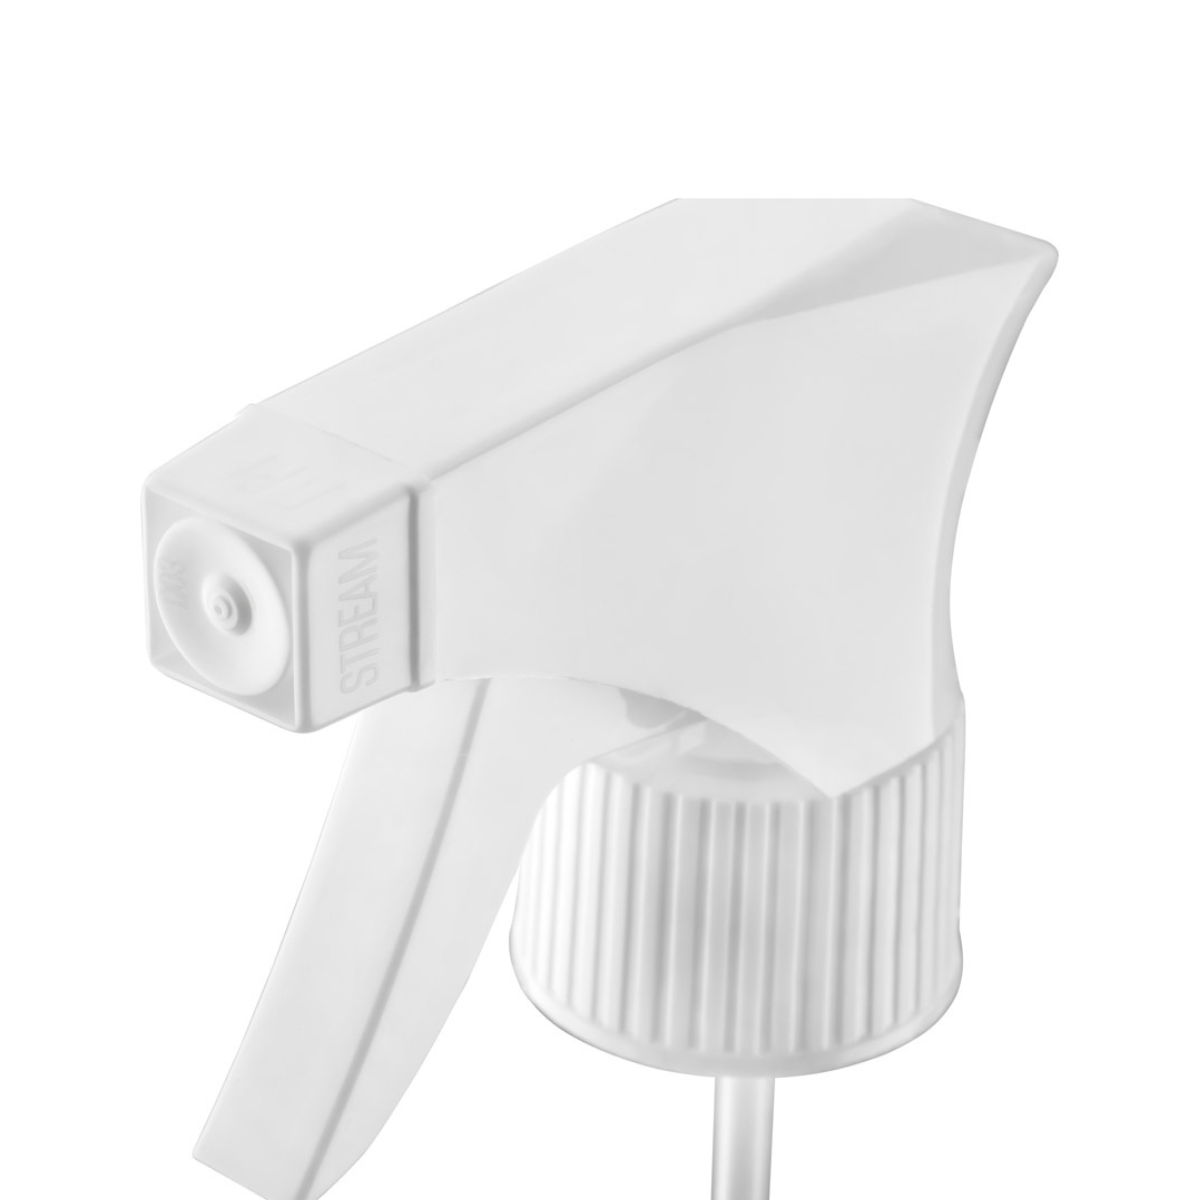 Dompel Trigger Sprayers valves, color white, thread 28/410, made with stainless steel springs and glass balls, with spray and stream Model 101D - depilcompany